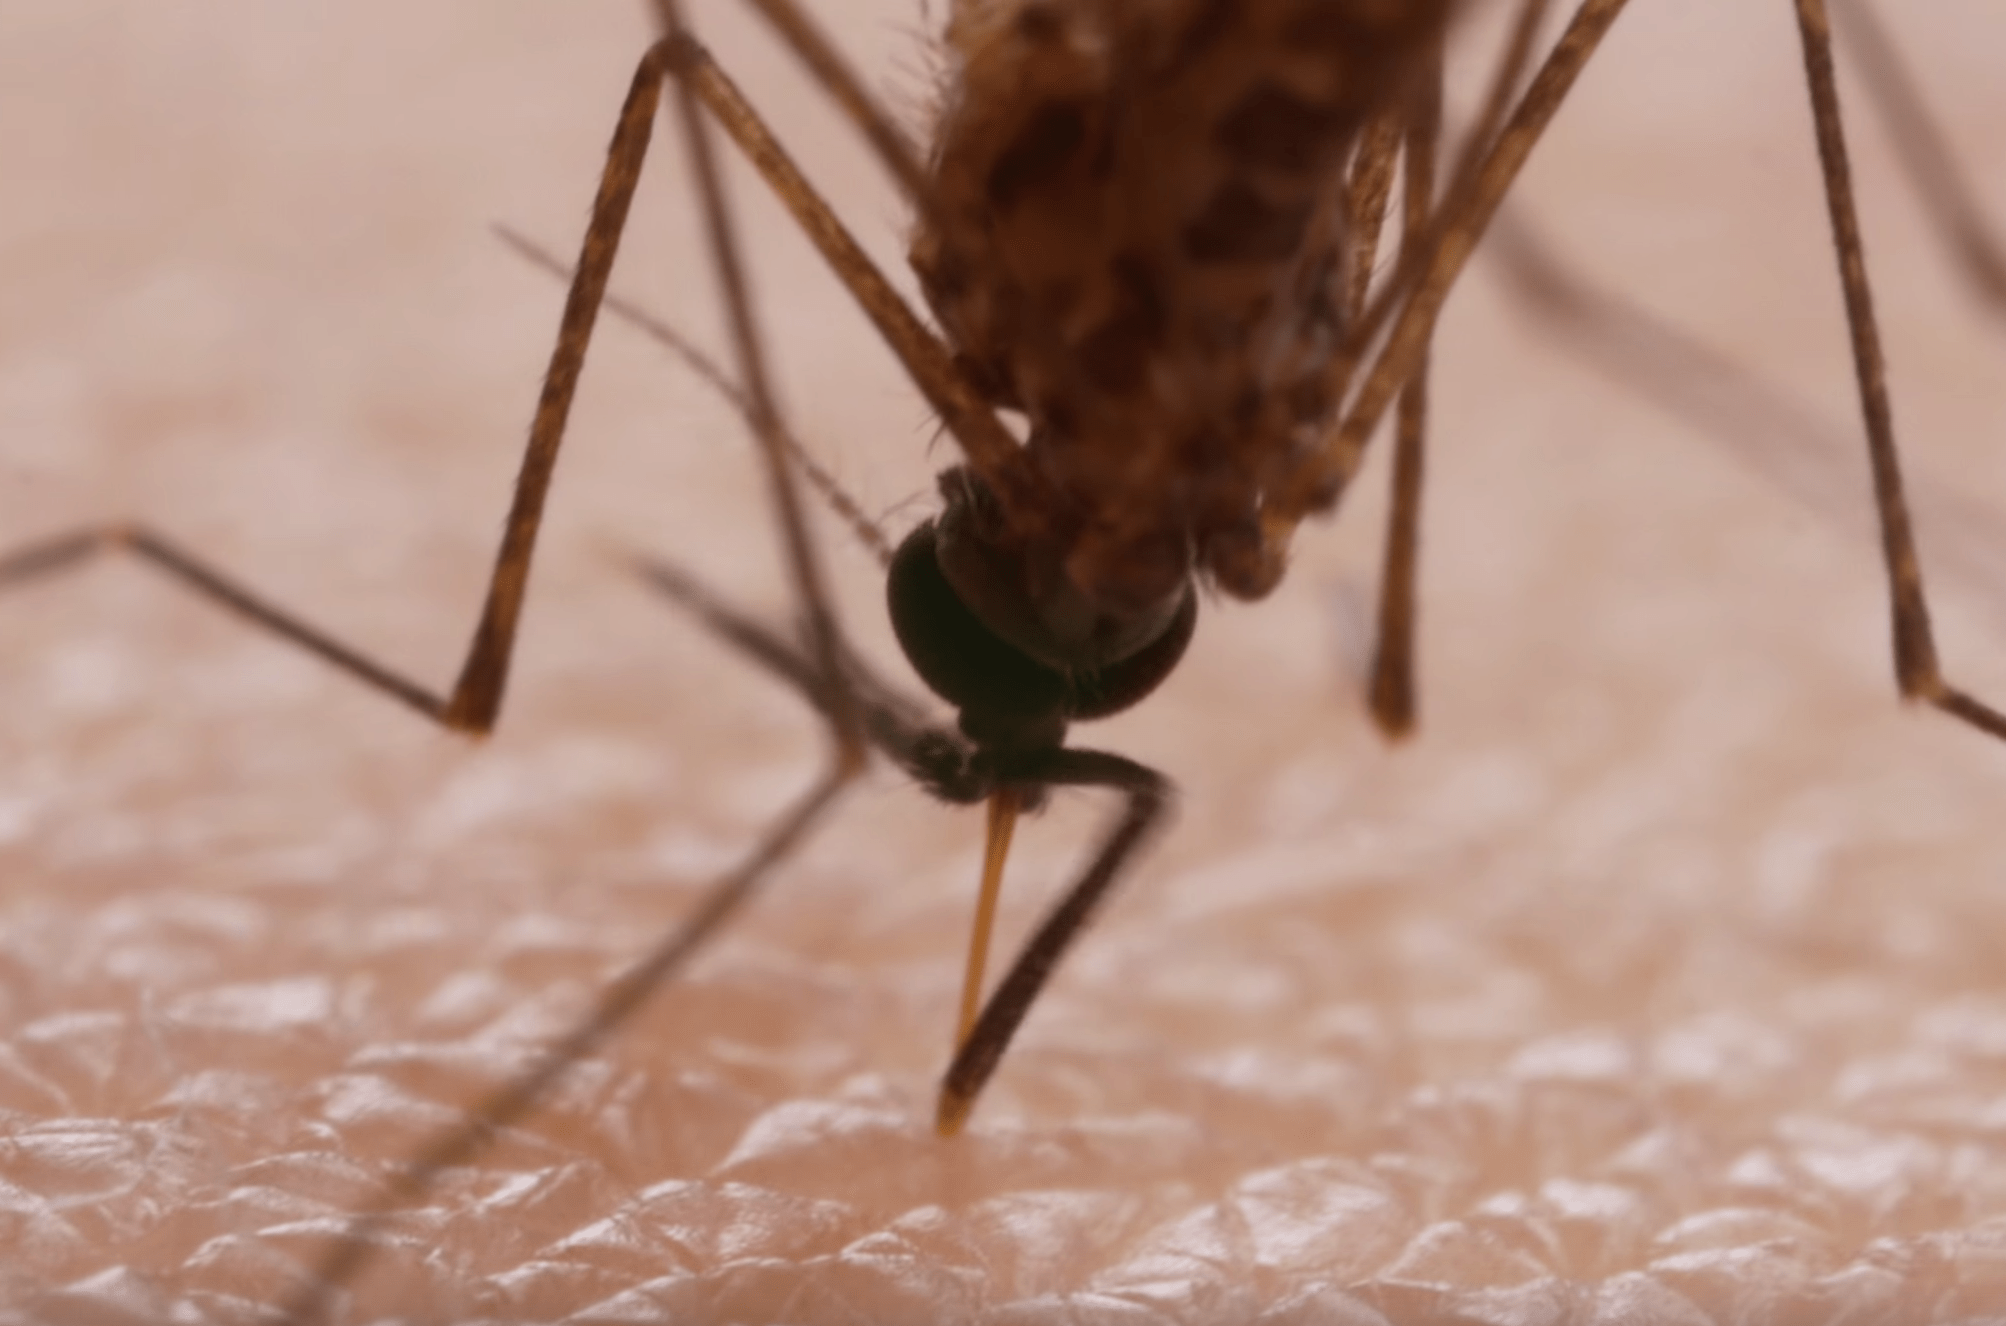 This Is How A Mosquito Saws Through Your Skin